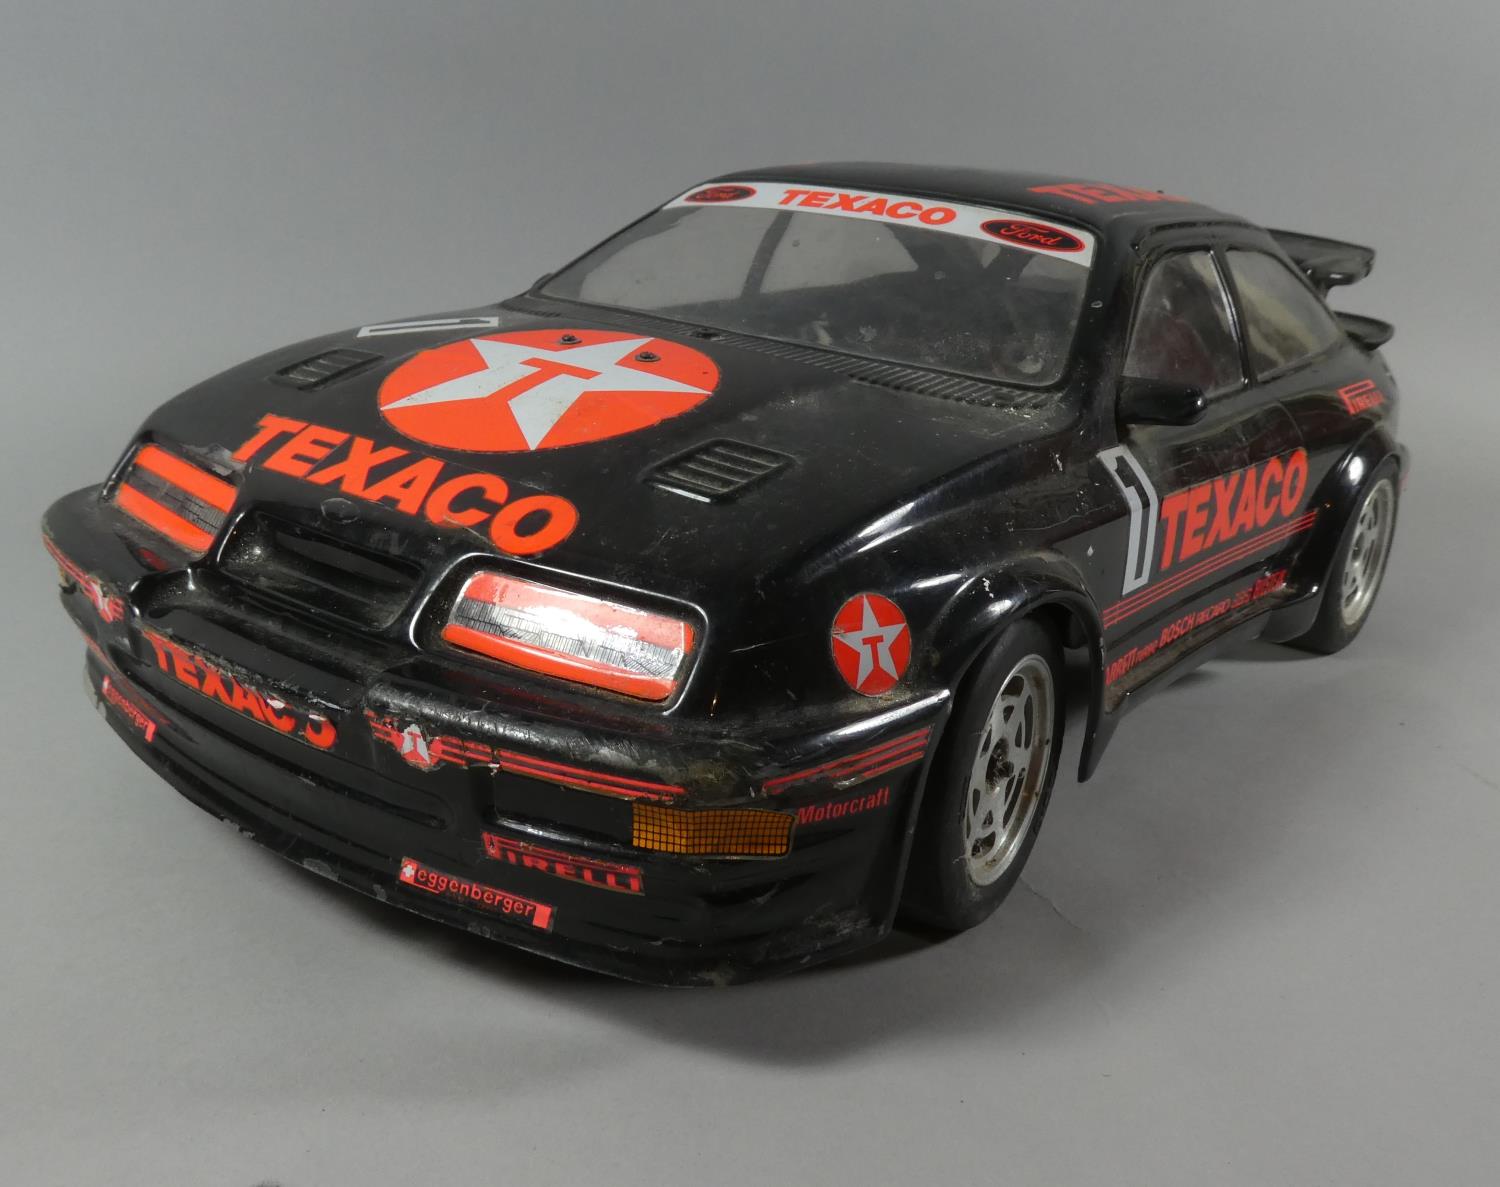 A Radio Controlled Ford Sierra Touring Car, Working but Controller Unchecked - Image 2 of 2